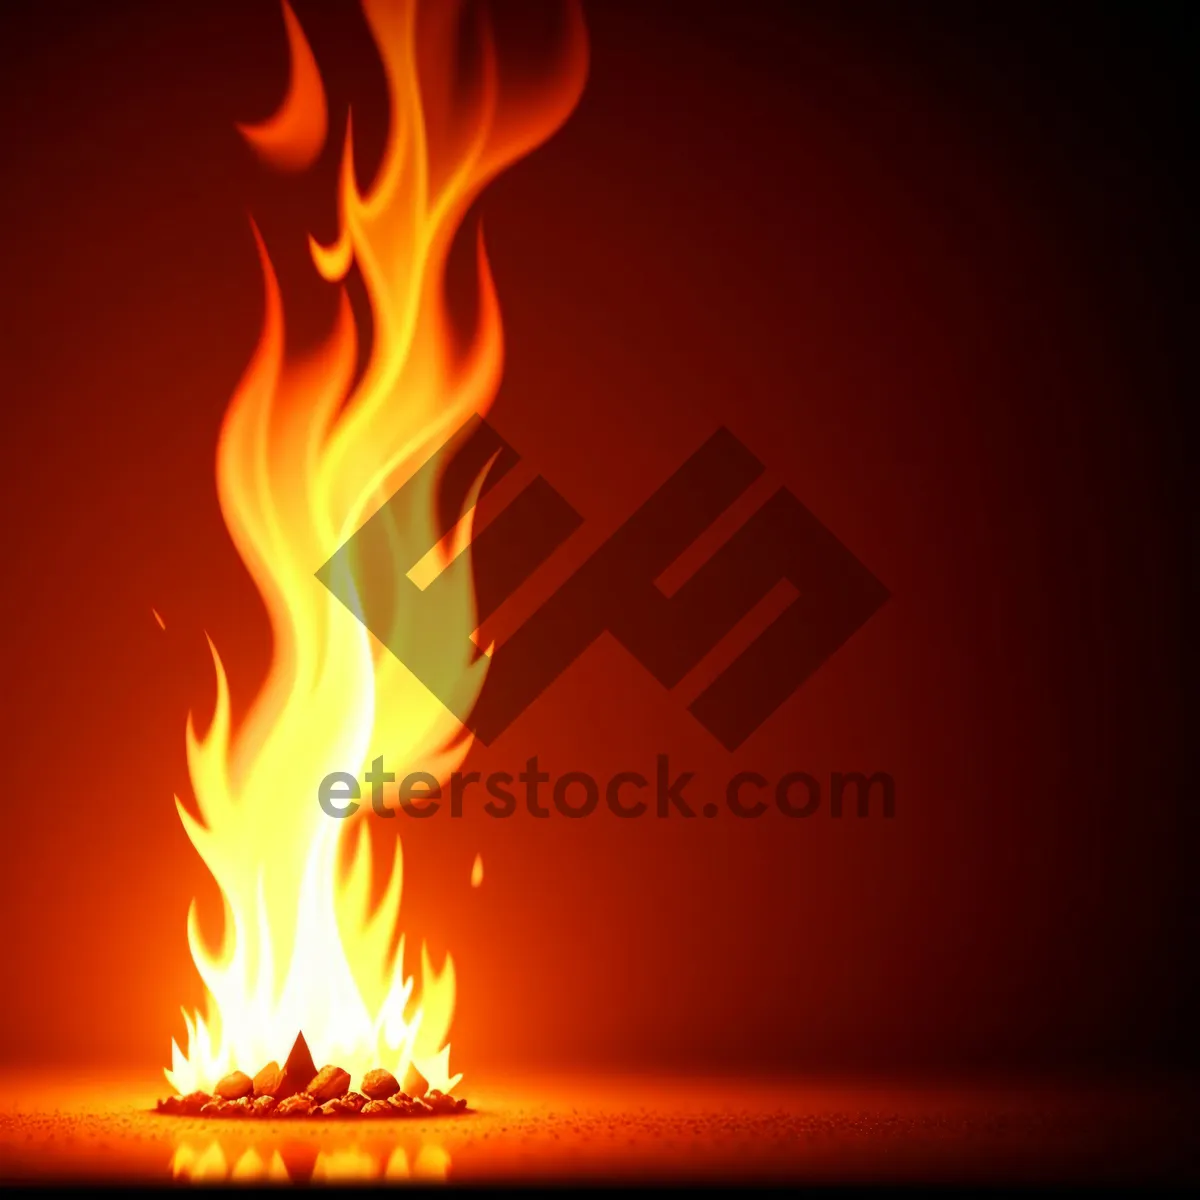 Picture of Searing Blaze: A Fiery Flaming Bonfire